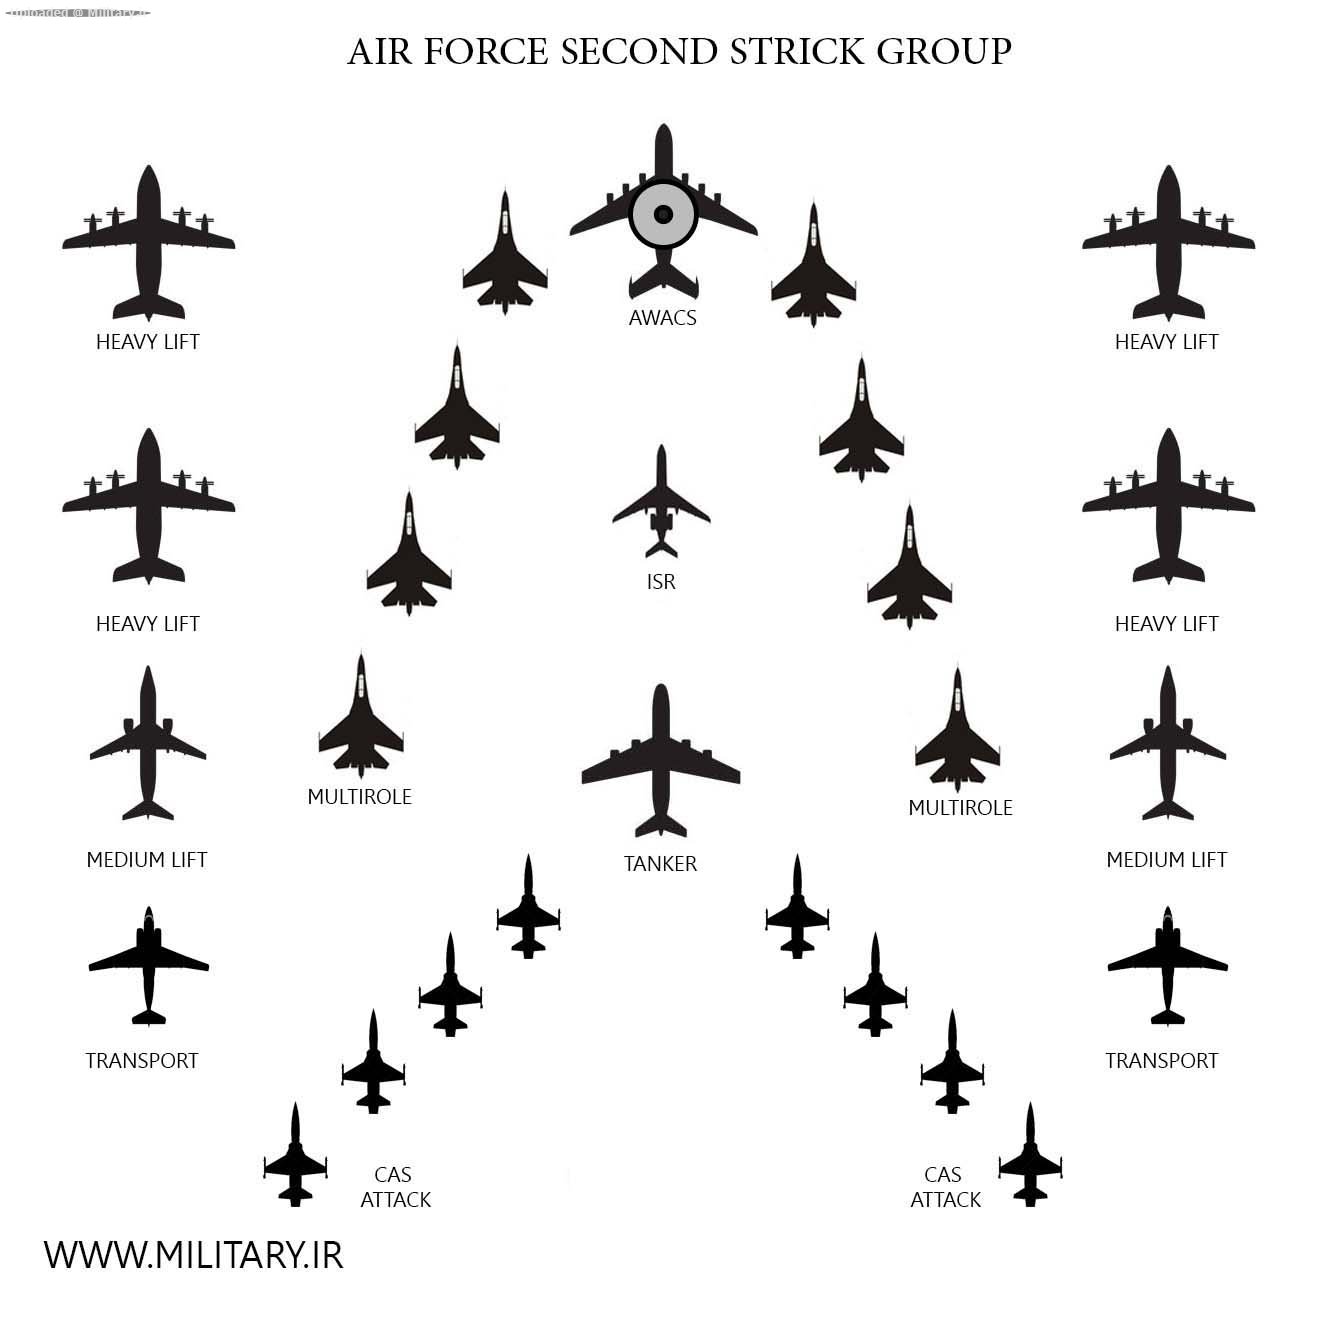 AIRFORCE_SECOND_STRICK_GROUP~0.jpg